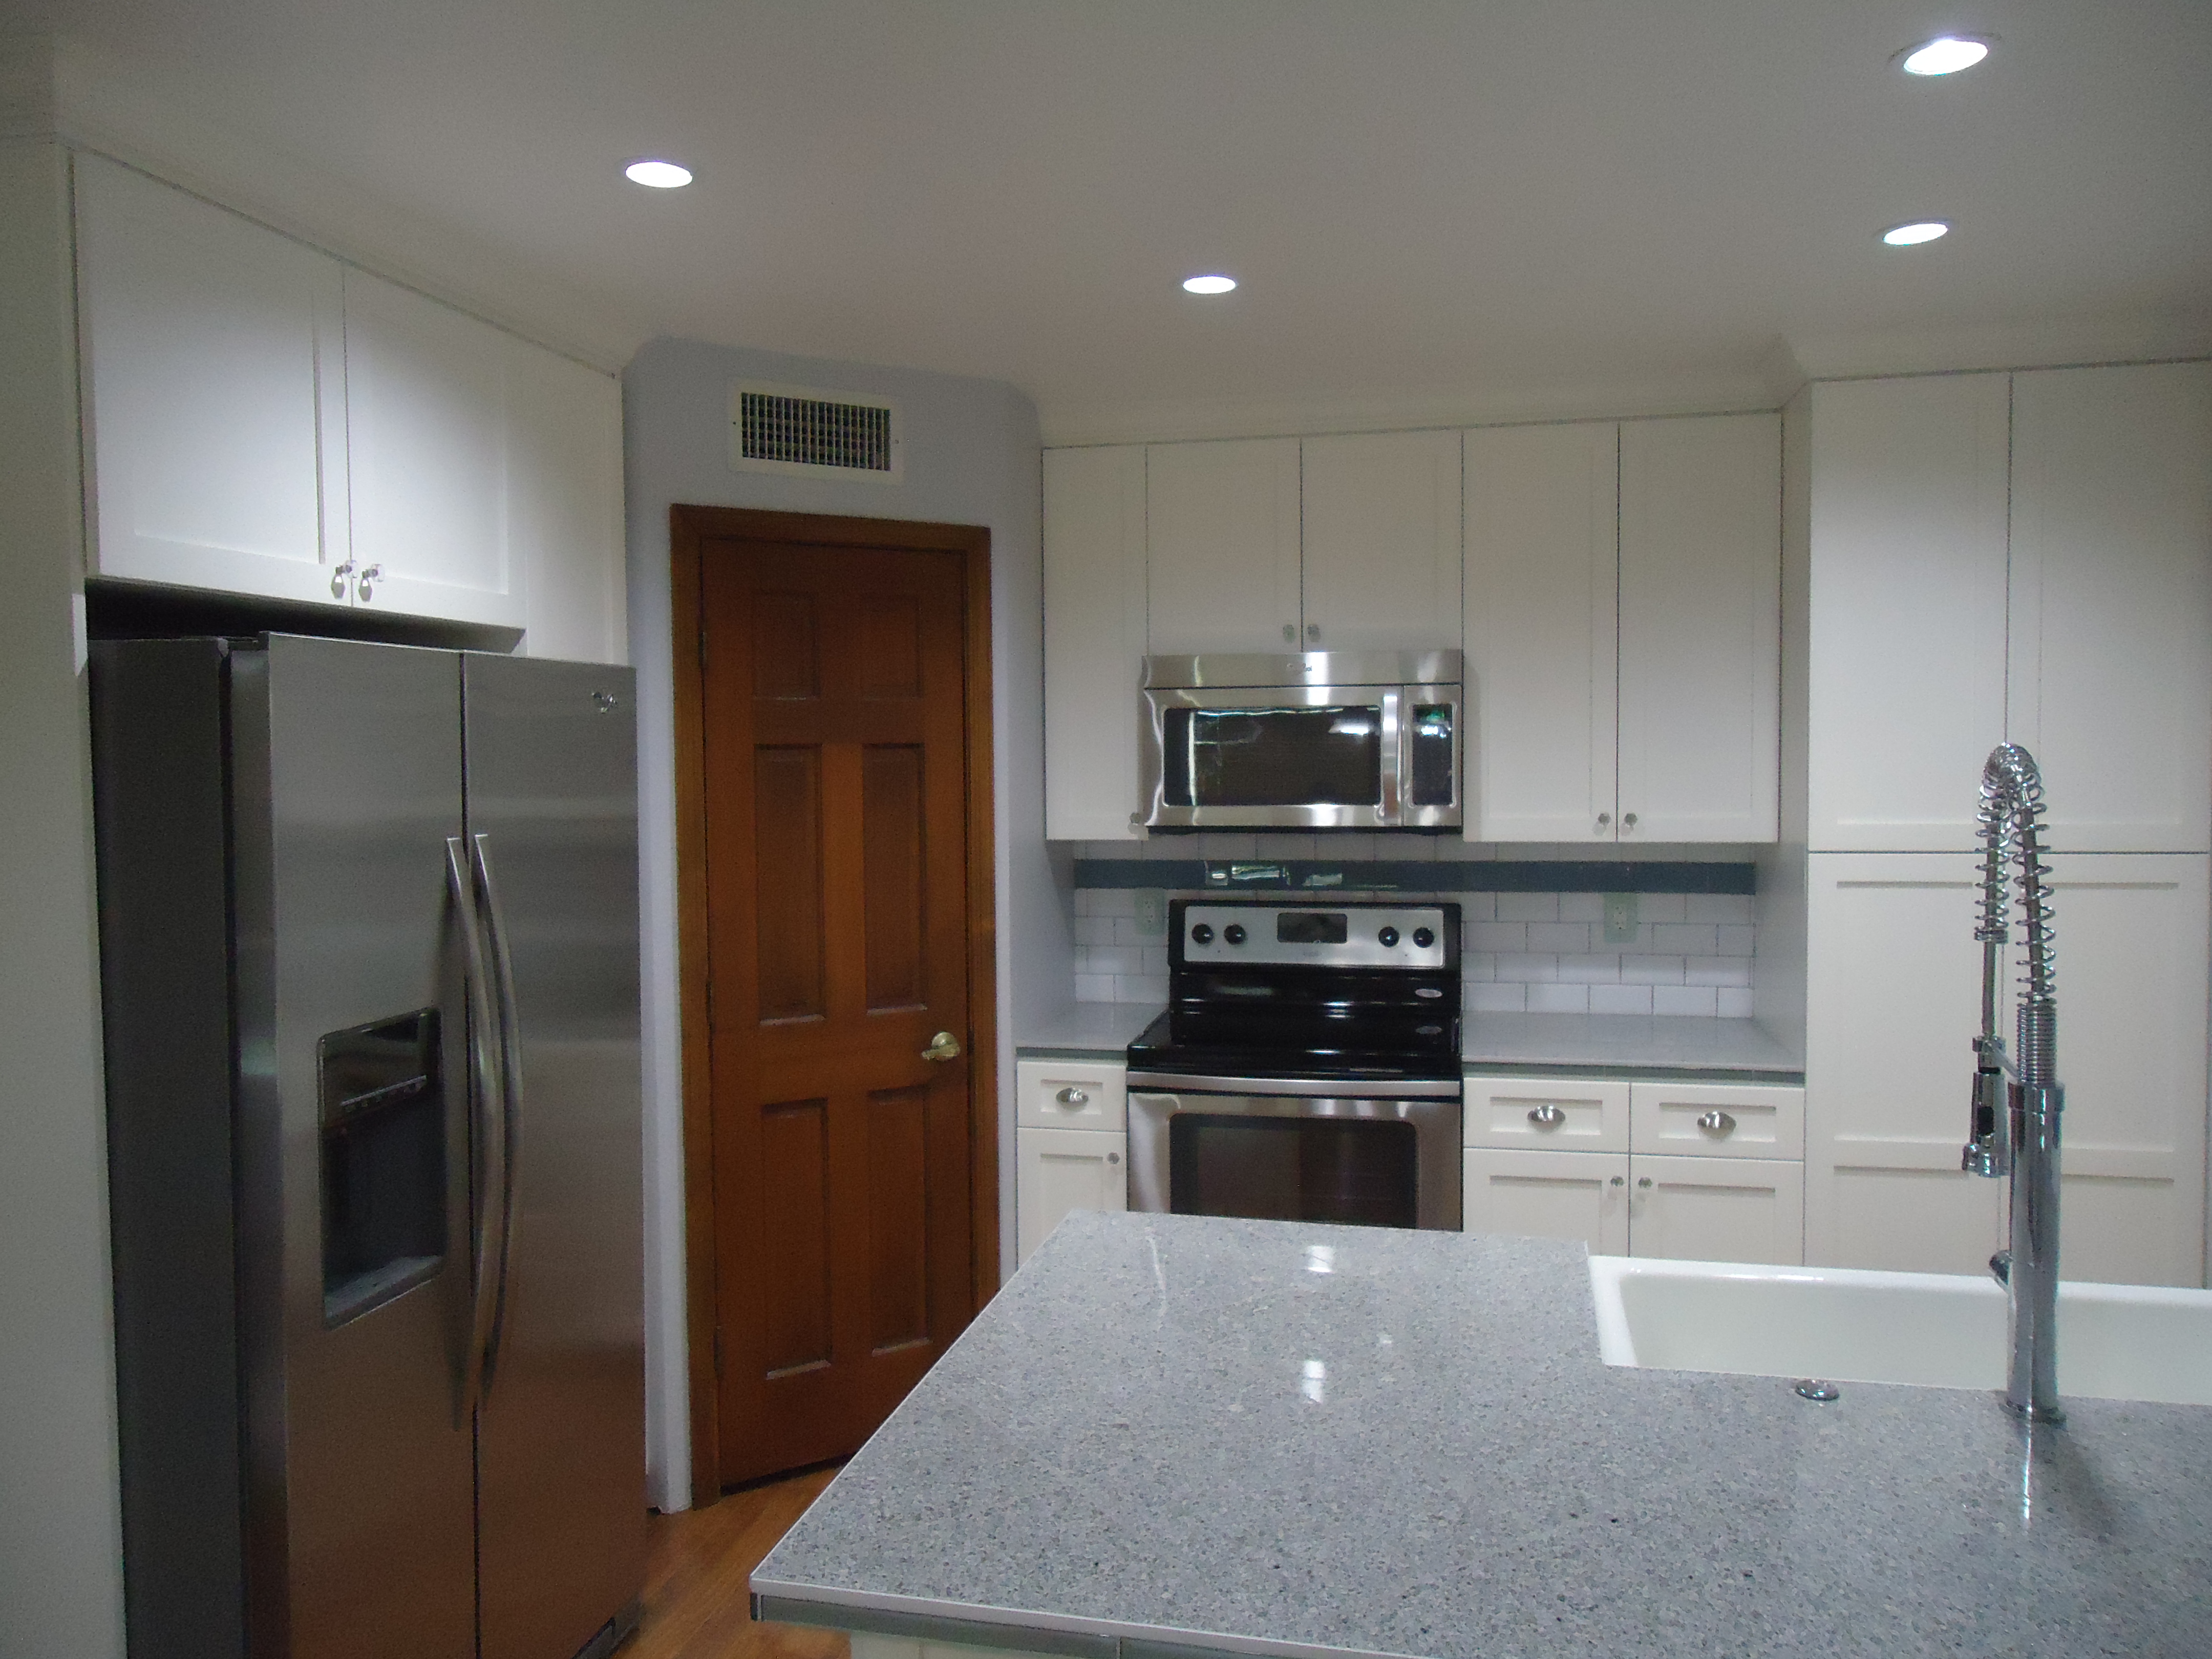 Side view remodeled kitchen island and upgraded appliances